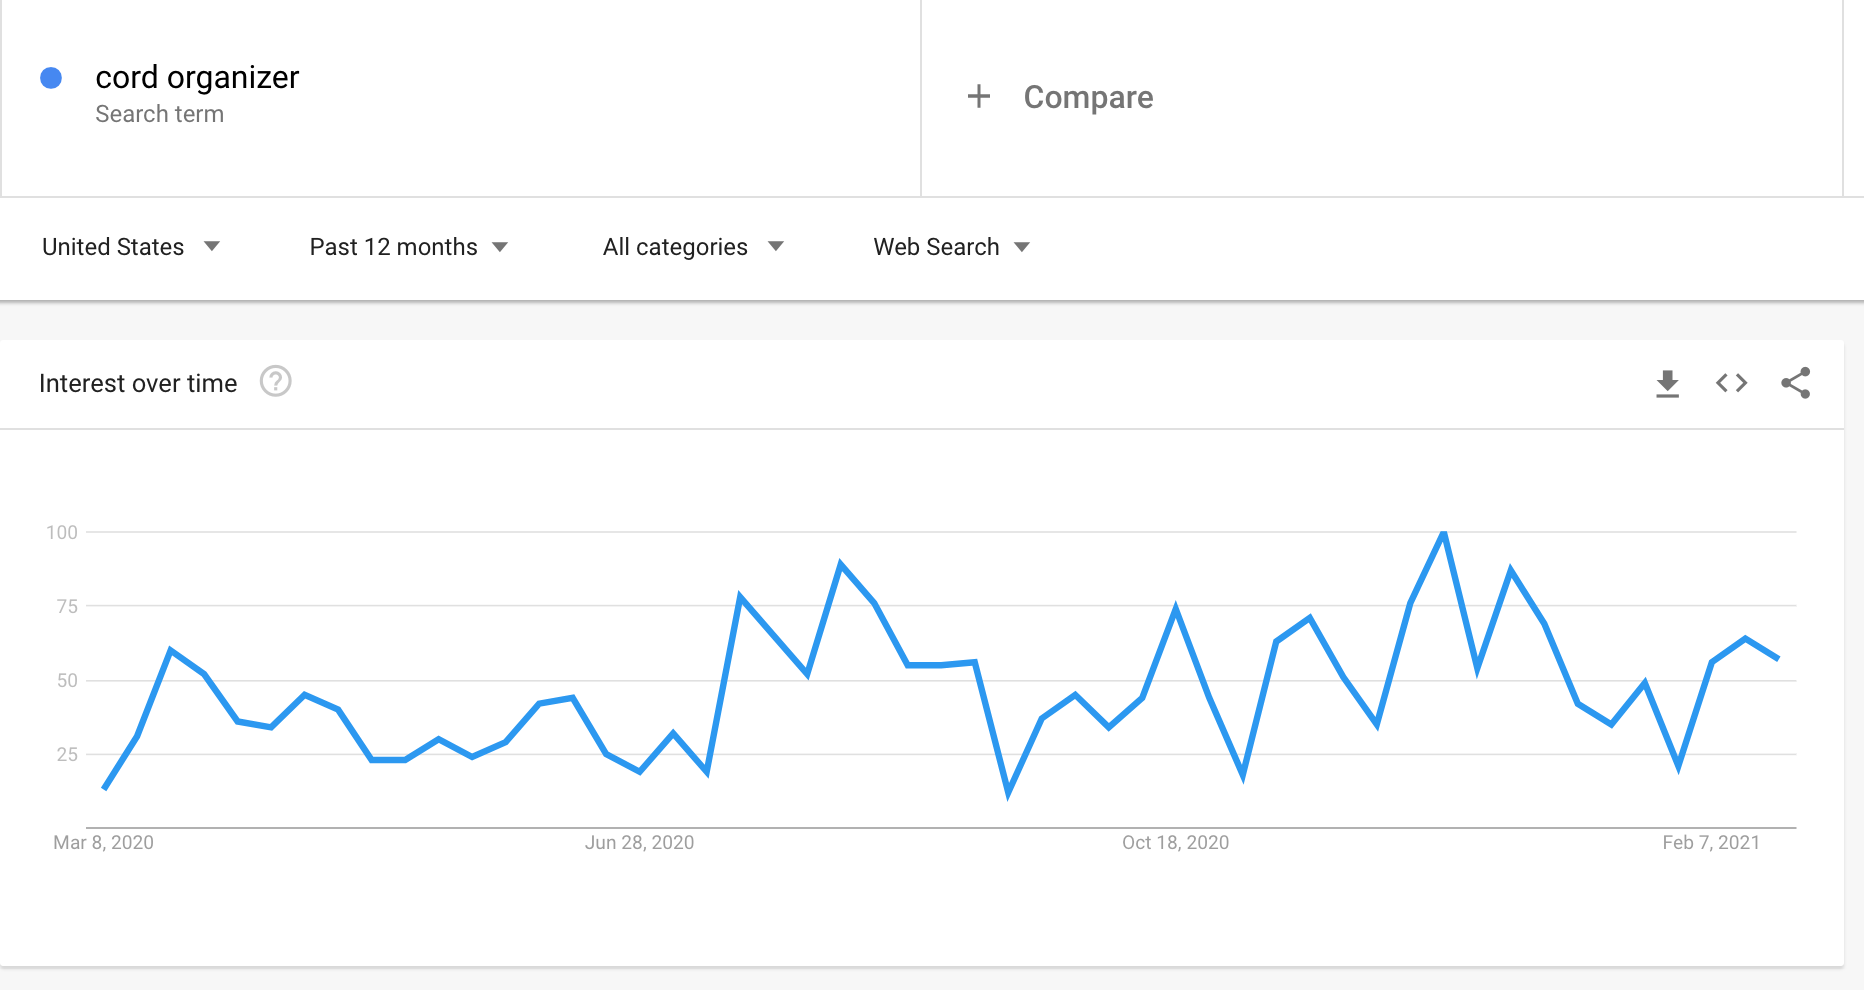 Google Trends graph showing the interest in cord organizers